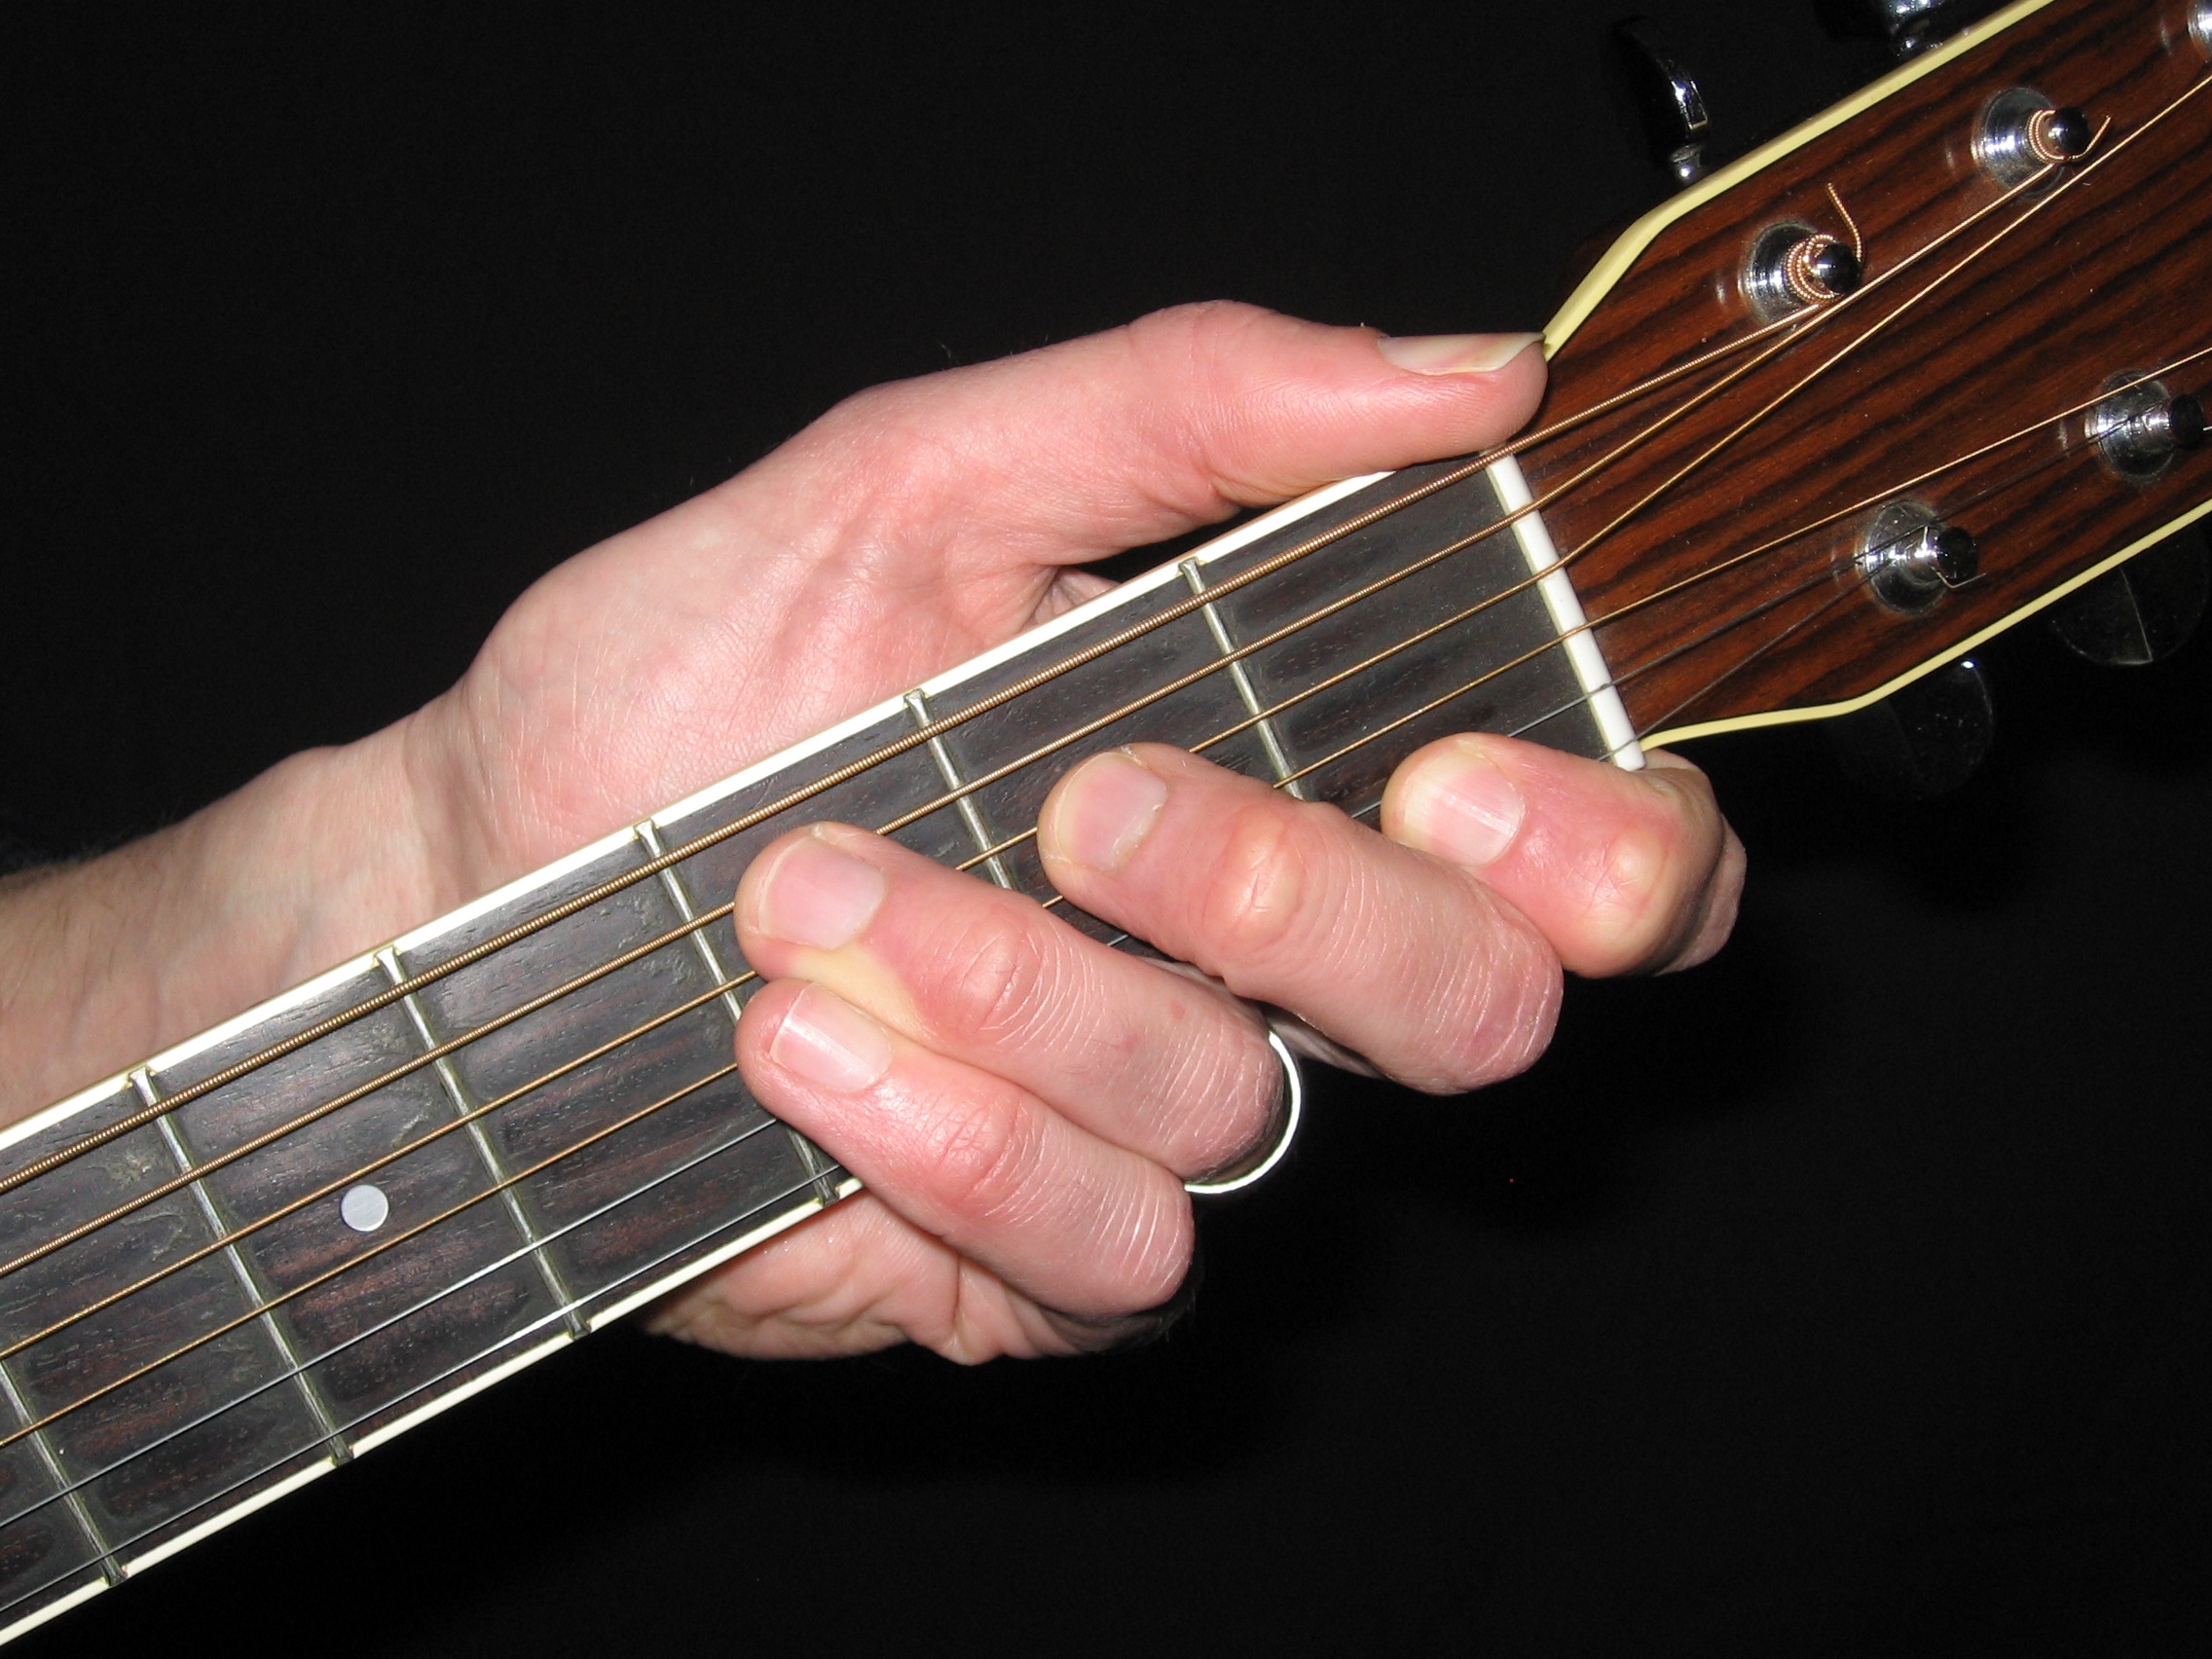 Guitar chord practice—make your chords sound better